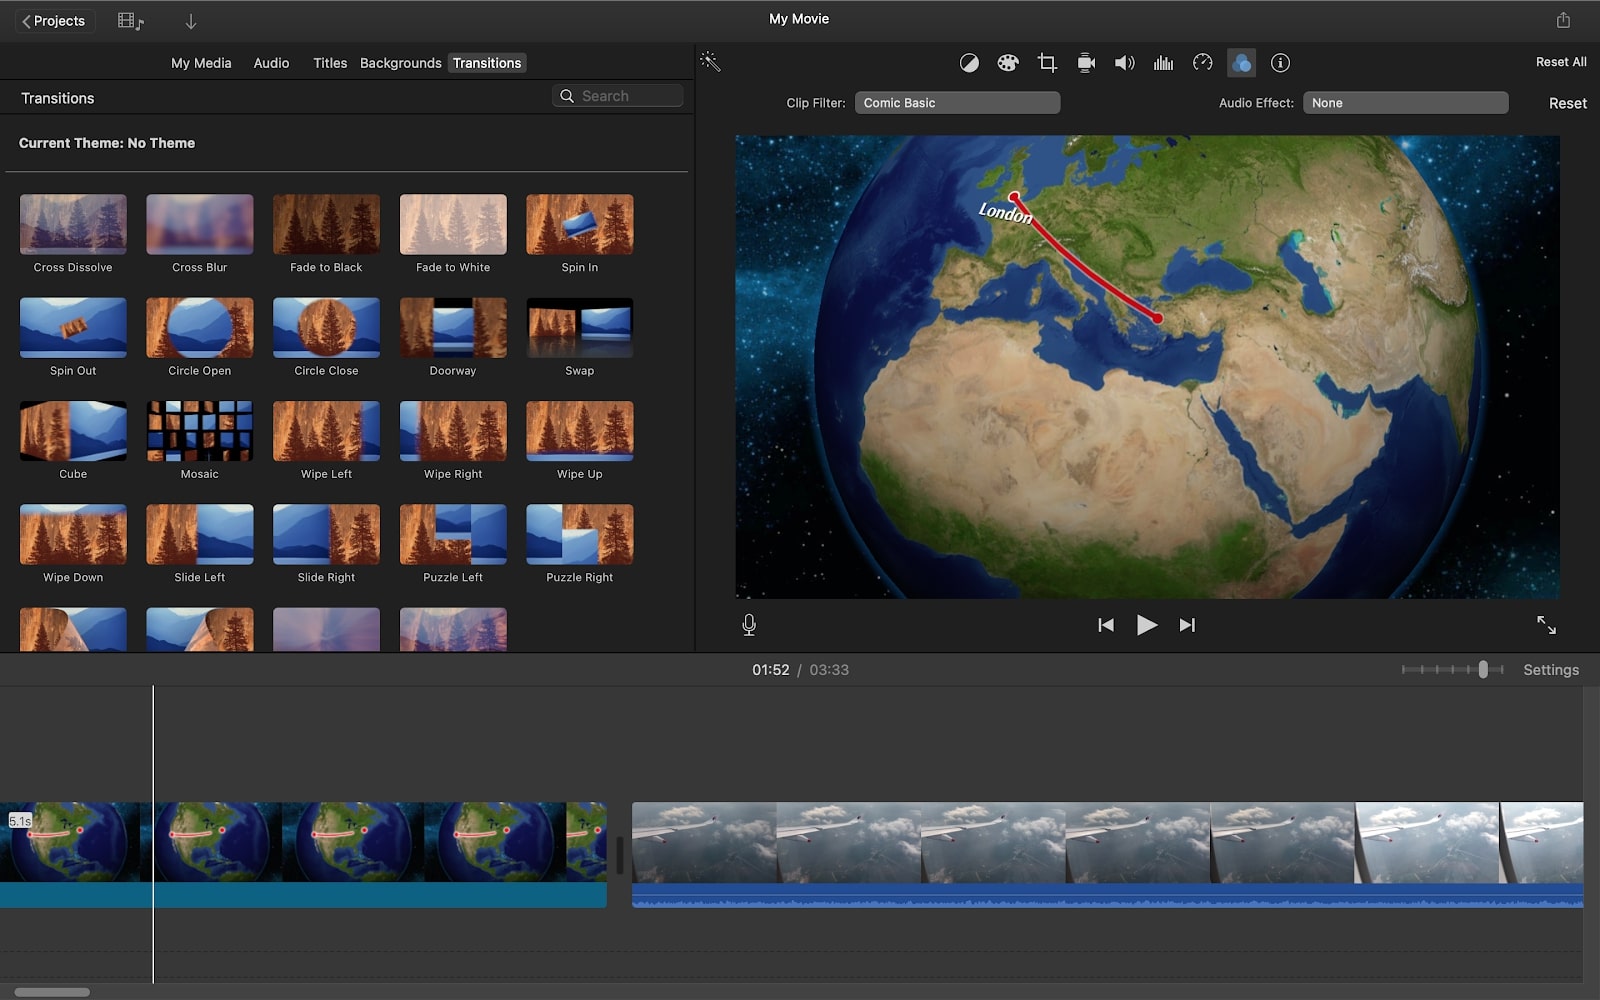 Interface of Apple iMovie, one of the best free video editing software tools